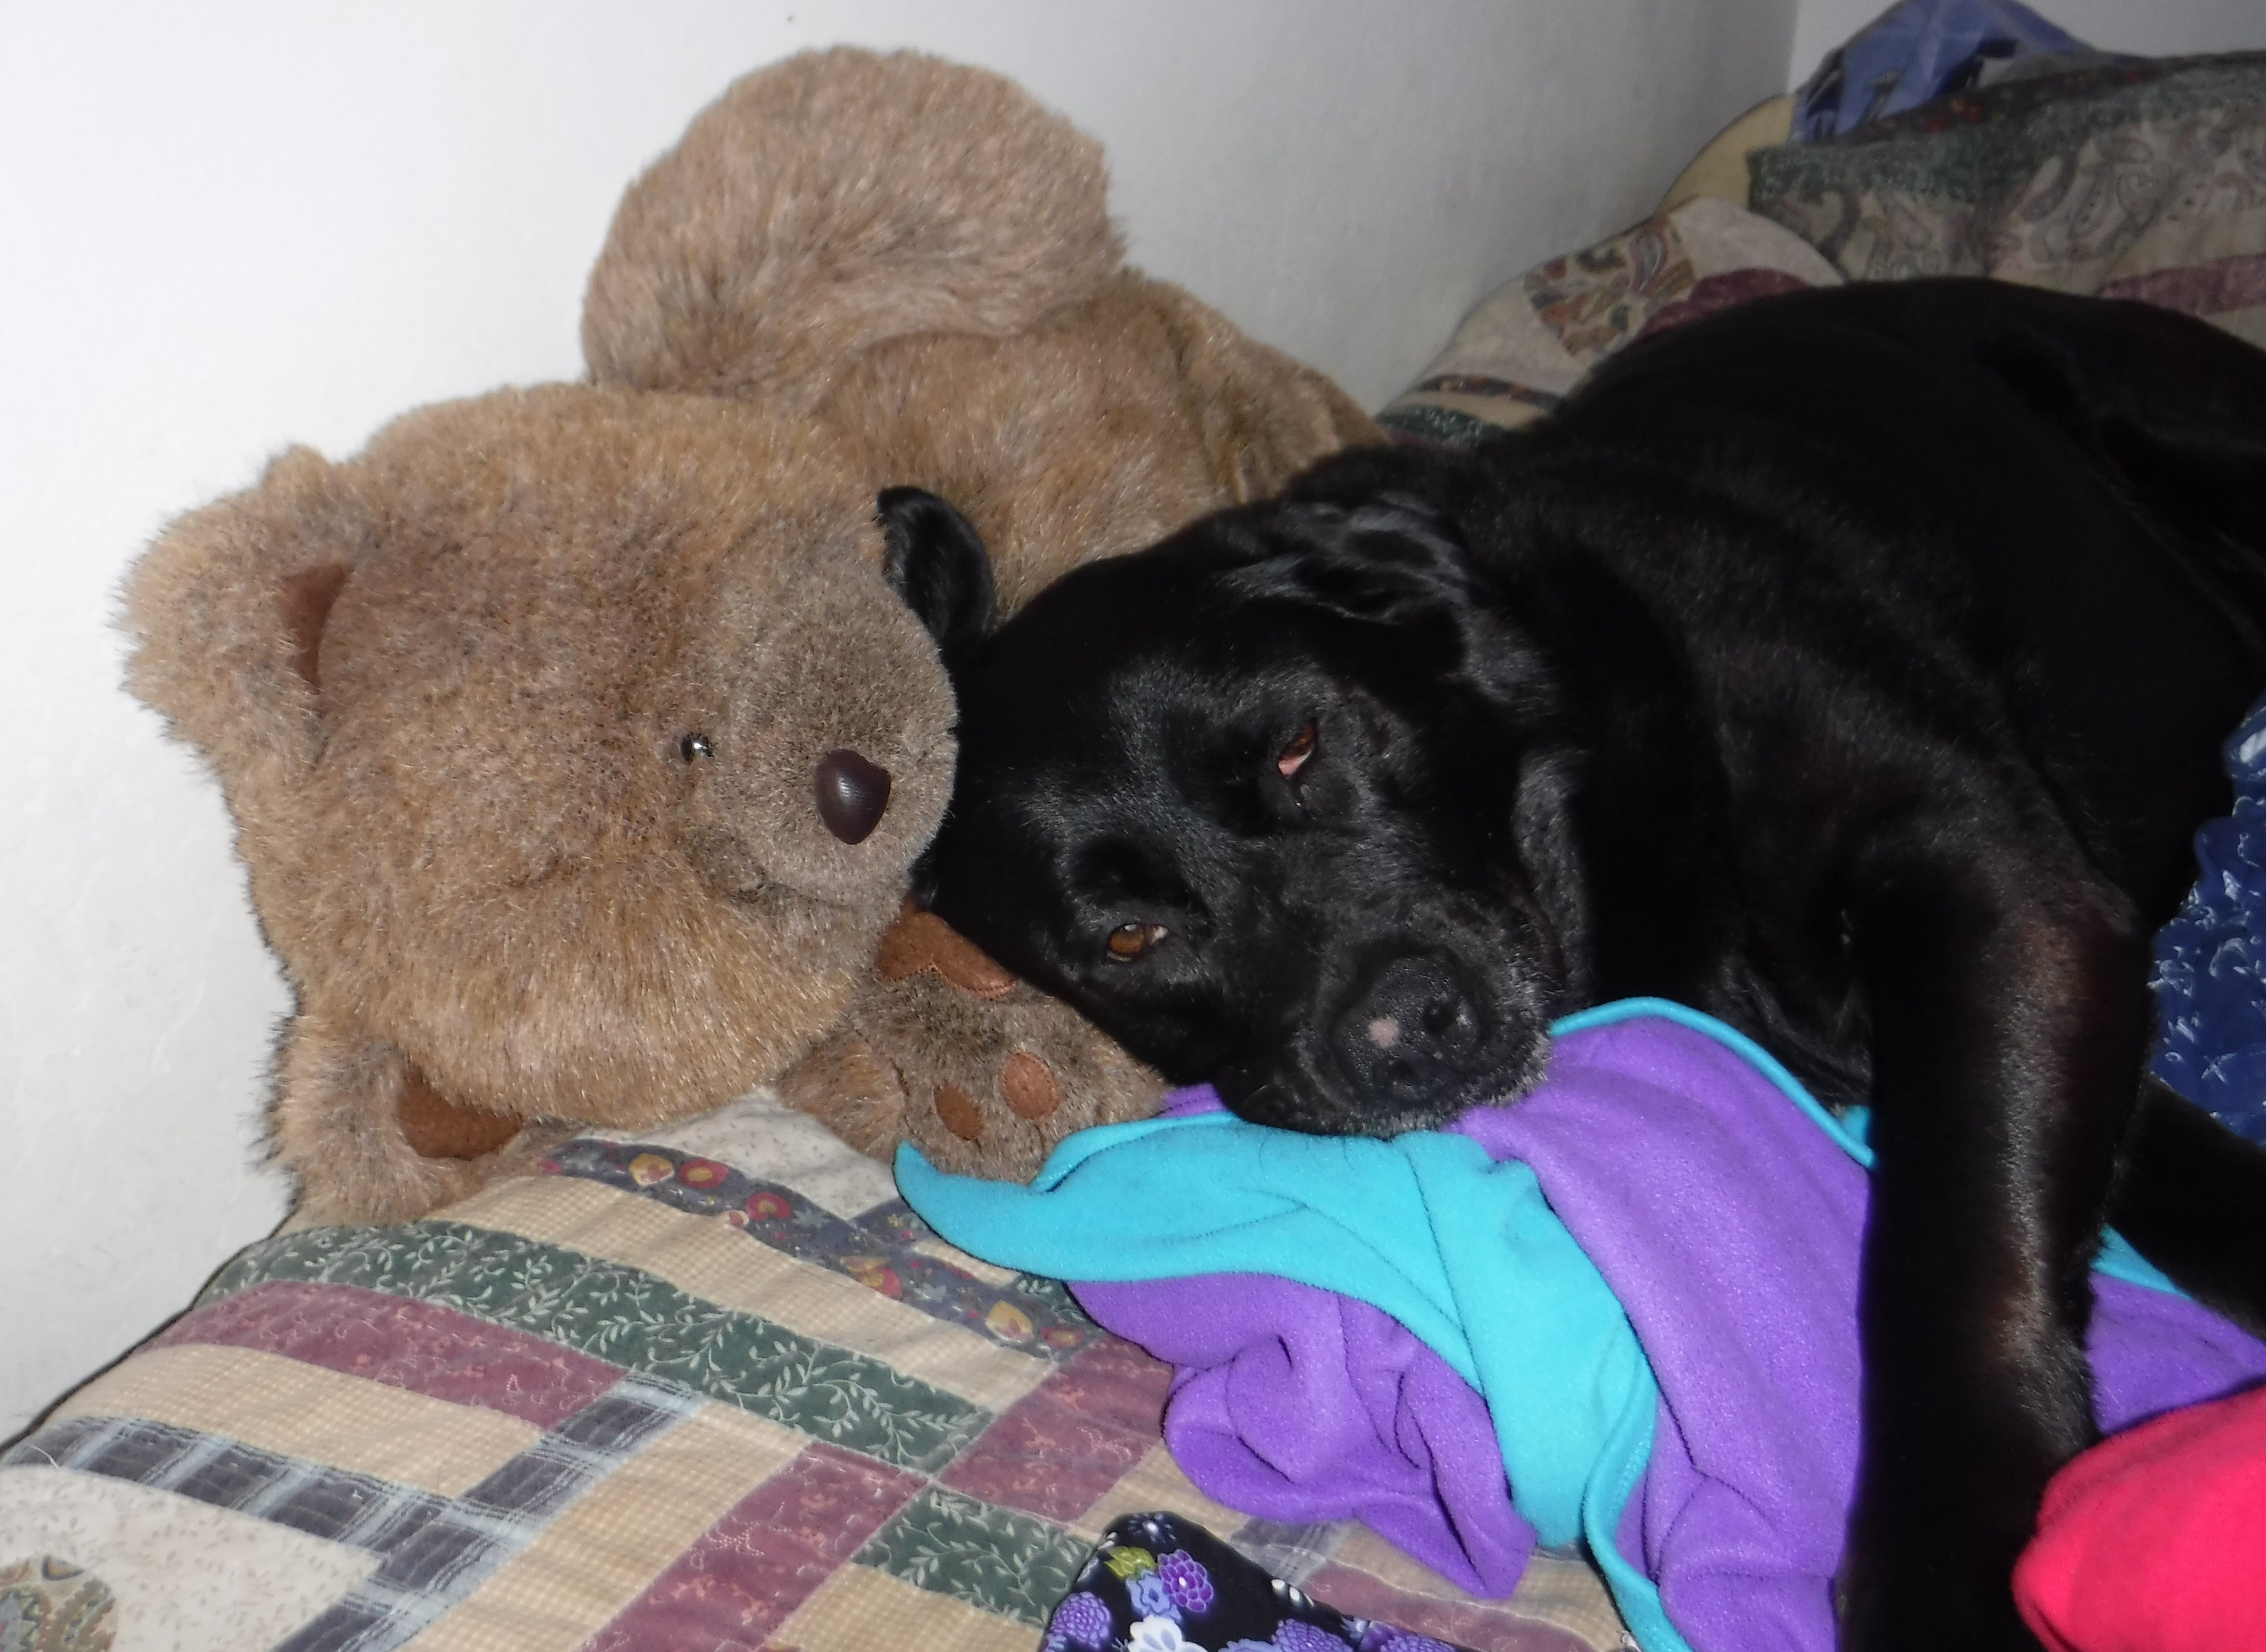 Photo I took of my spoiled rotten dog using my laundry and grandmother's bear as a pillow